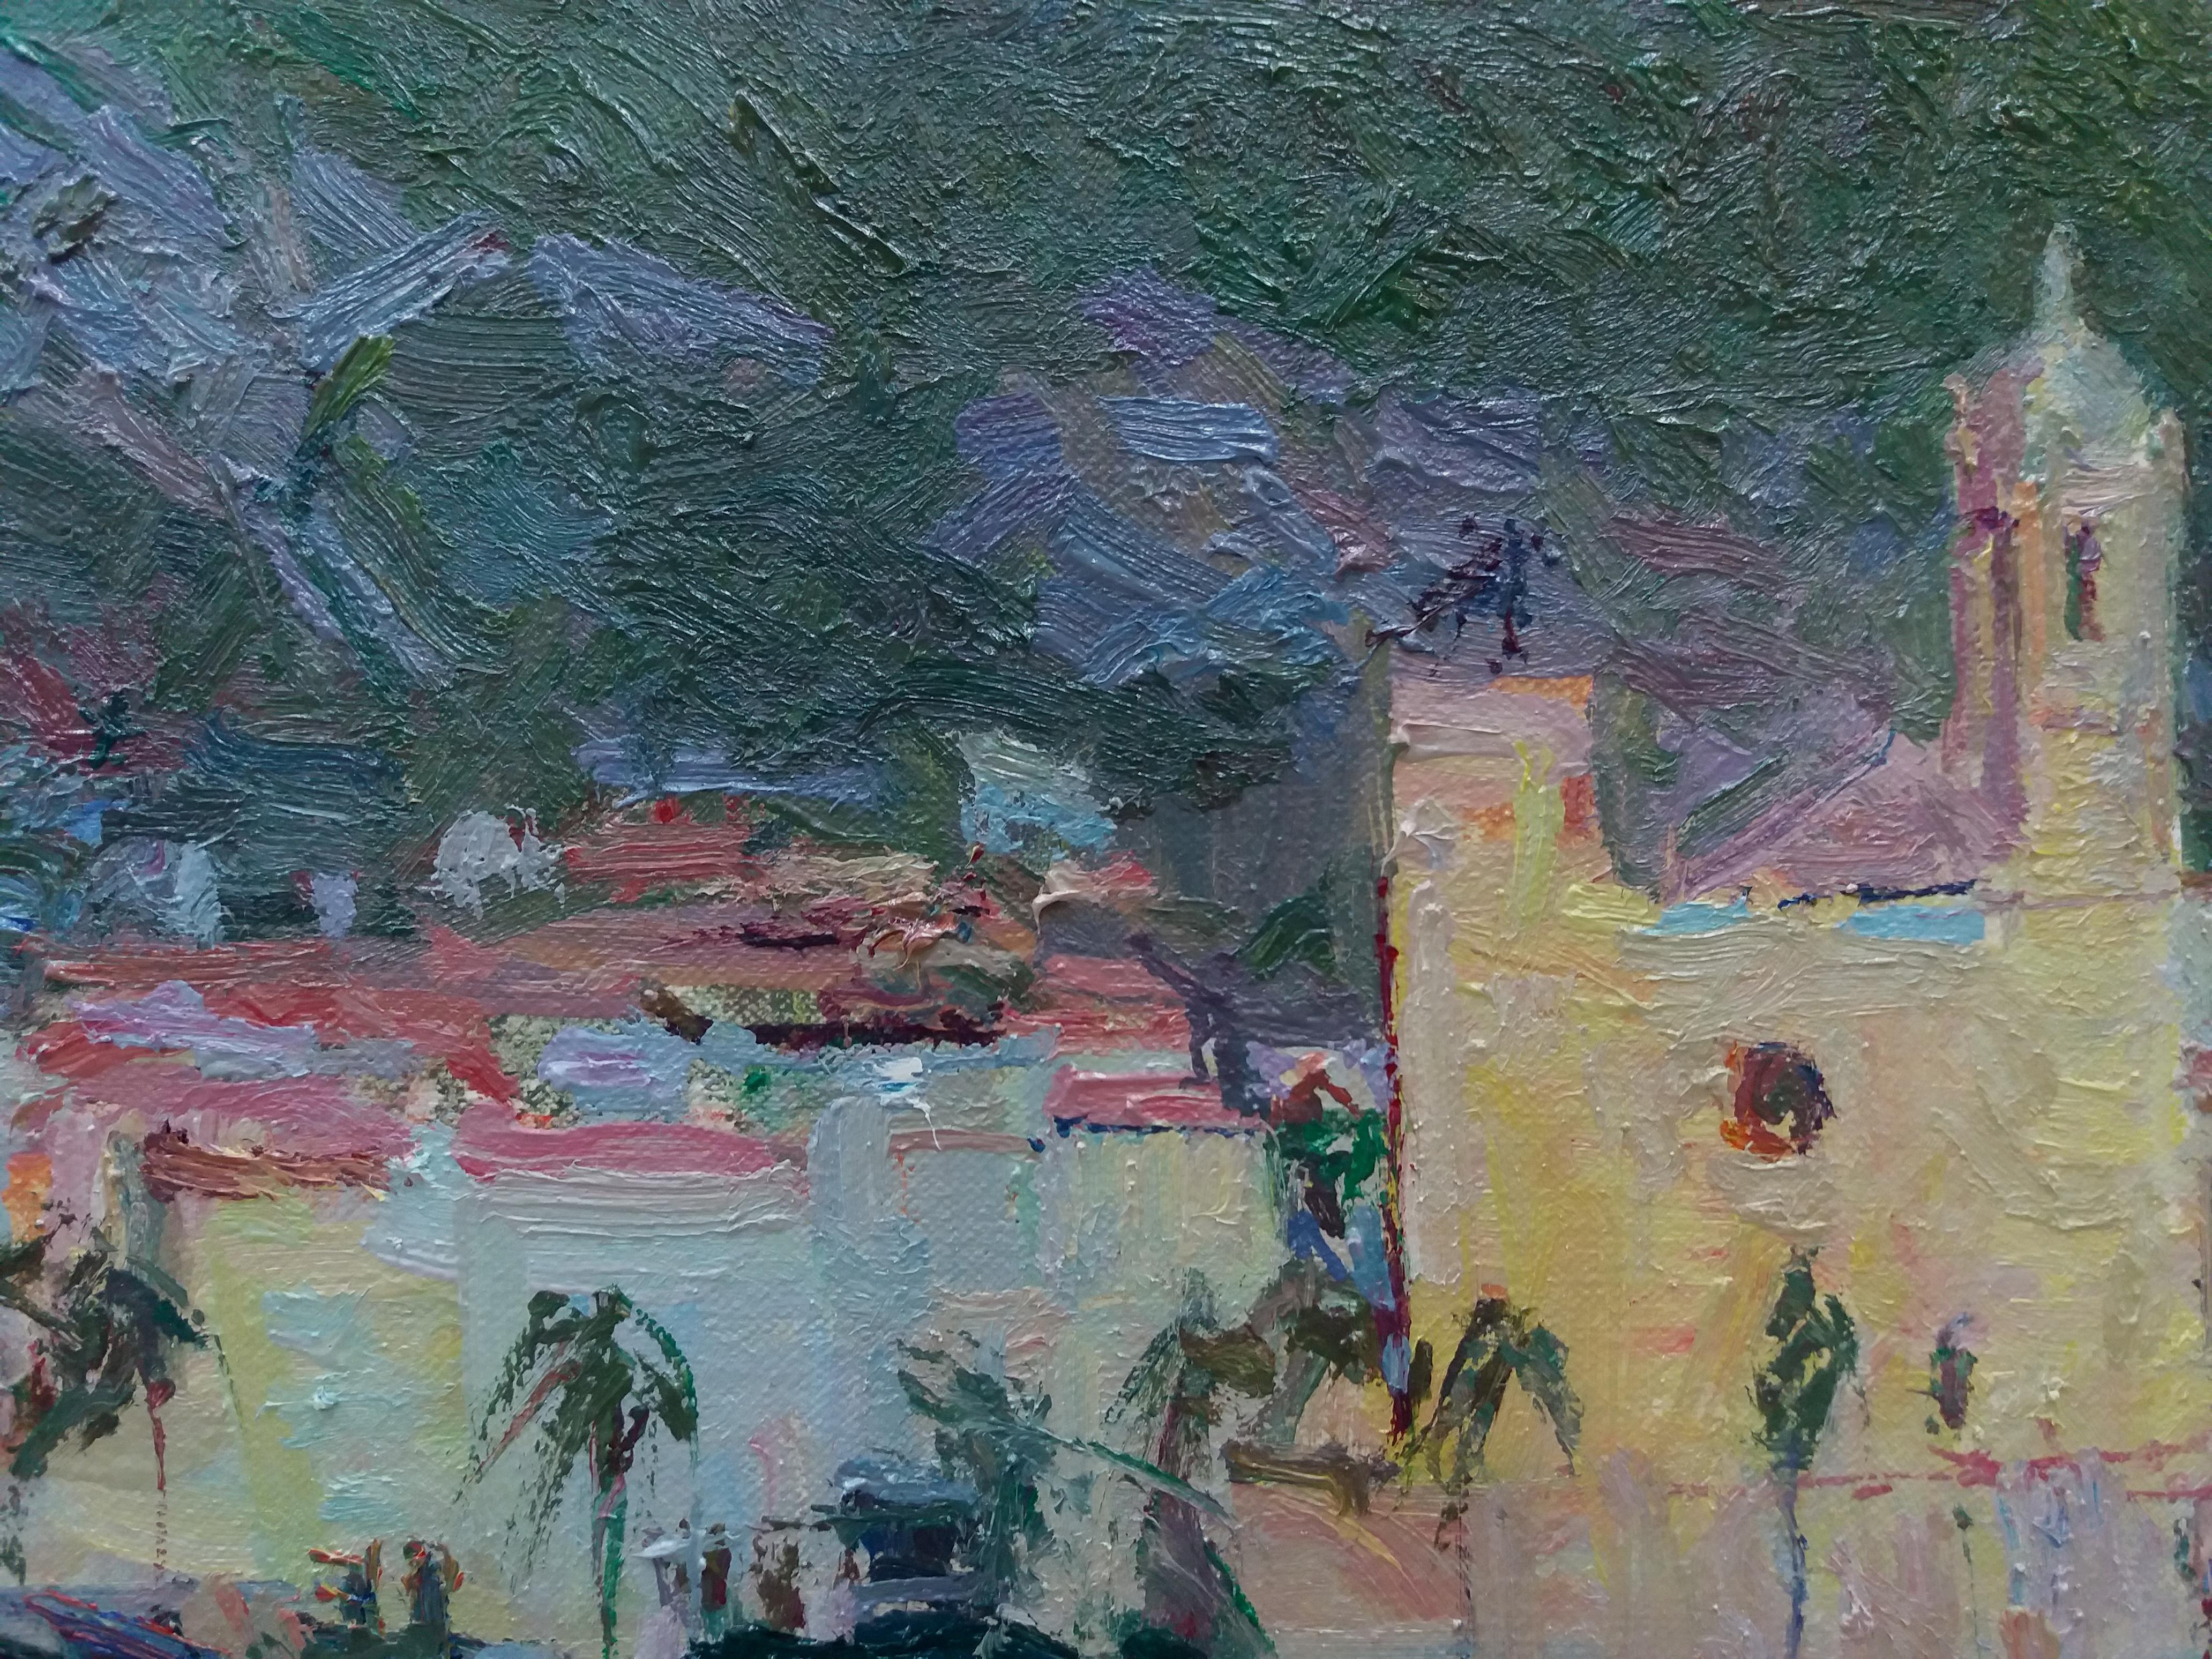 Sitges original impressionist acrylic painting.
Sola PUIG, Joan (Barcelona 1950 )

Joan SOLÁ paints in a natural way, which reflects the Old Masters, soaking up the colour, air, smell and the pure scent of his environment. He delivers to his canvas